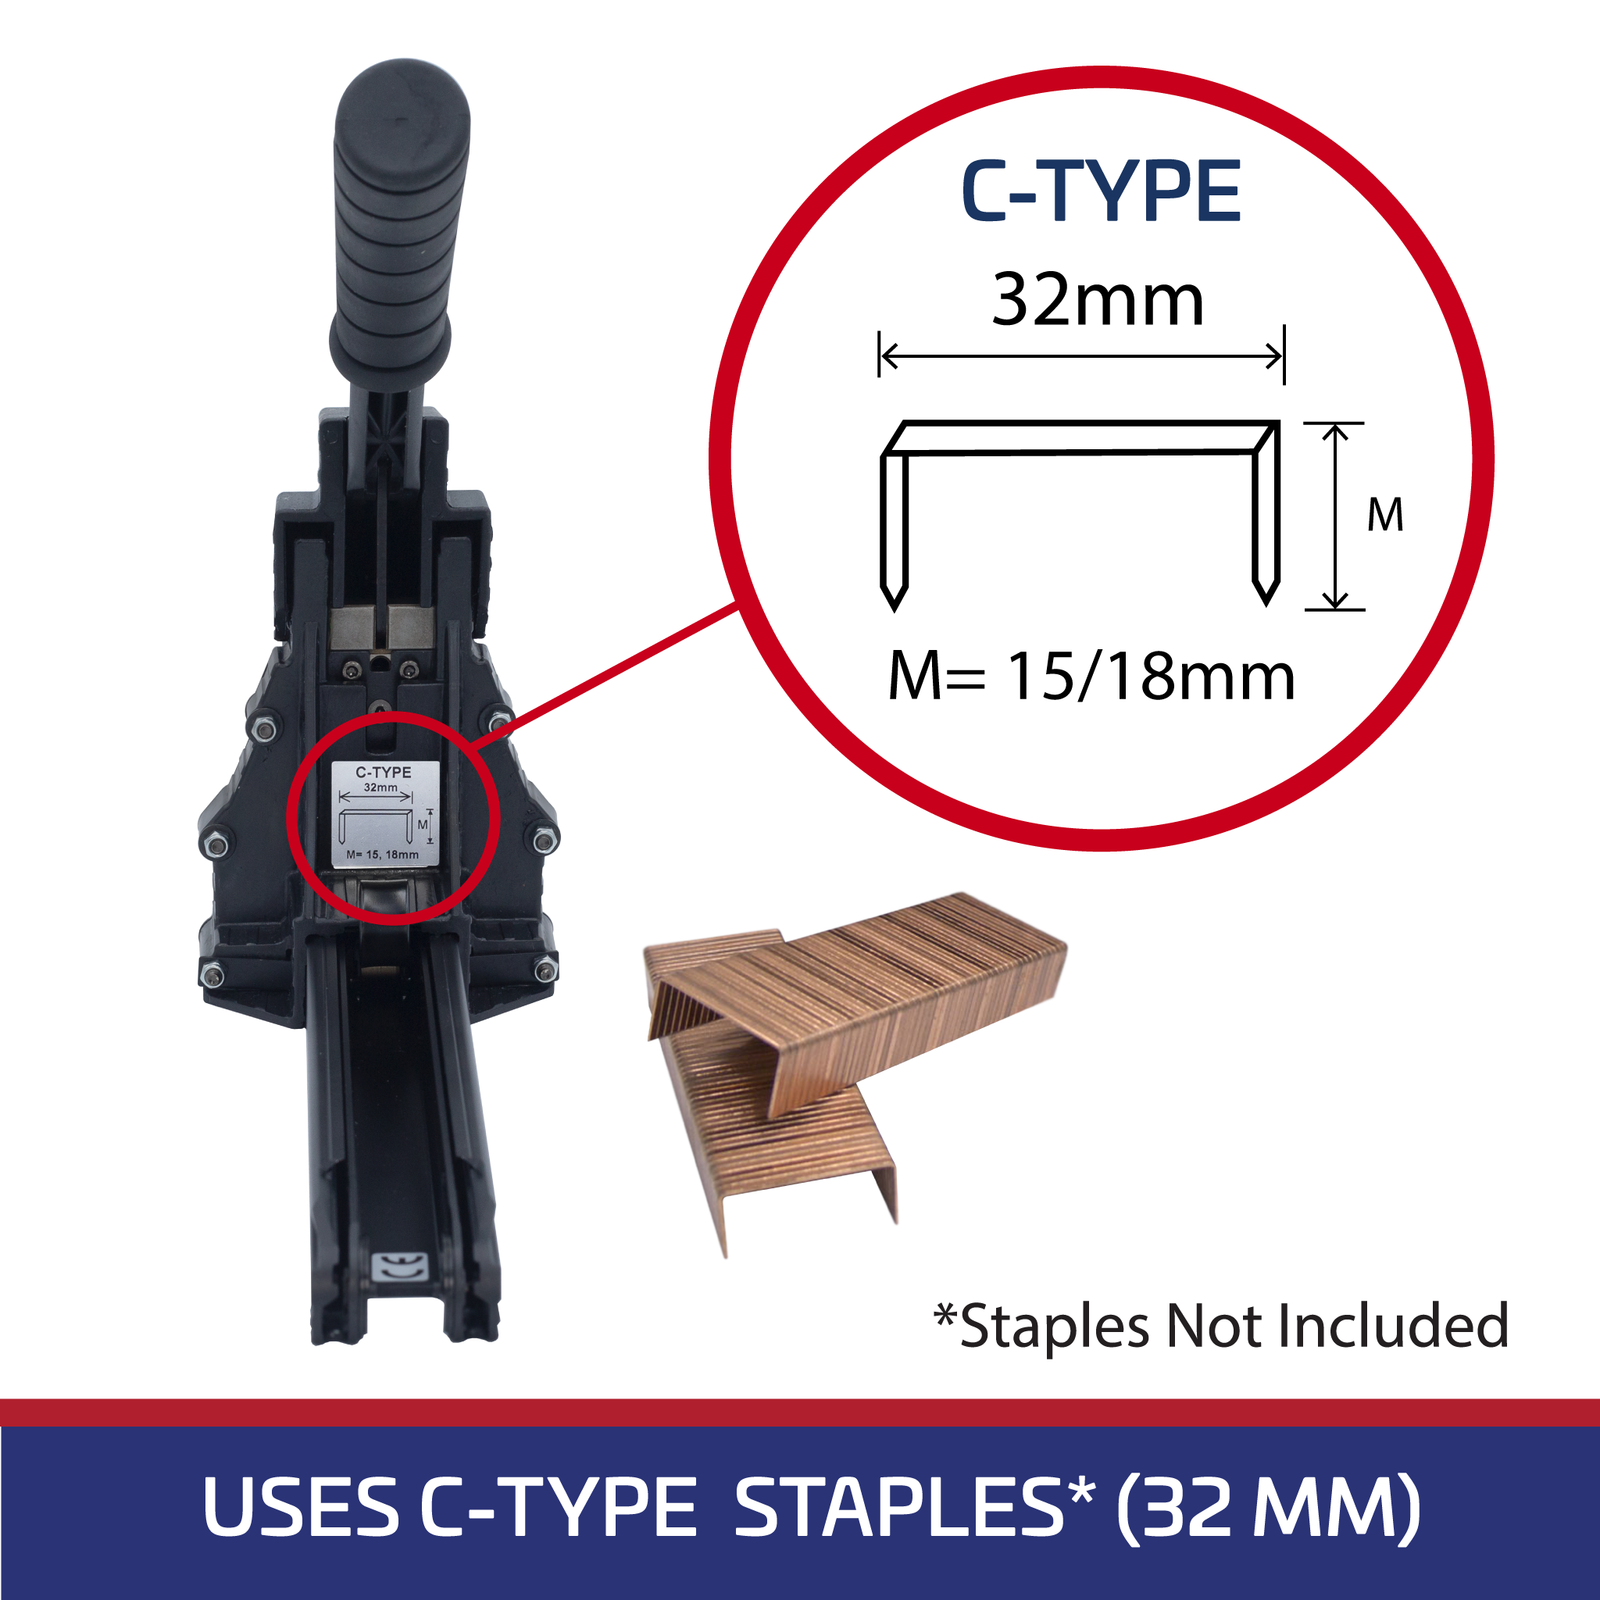 blue and red infographic showing measurements of acceptable staples for black manual carton stapler 32mm. Staples not included